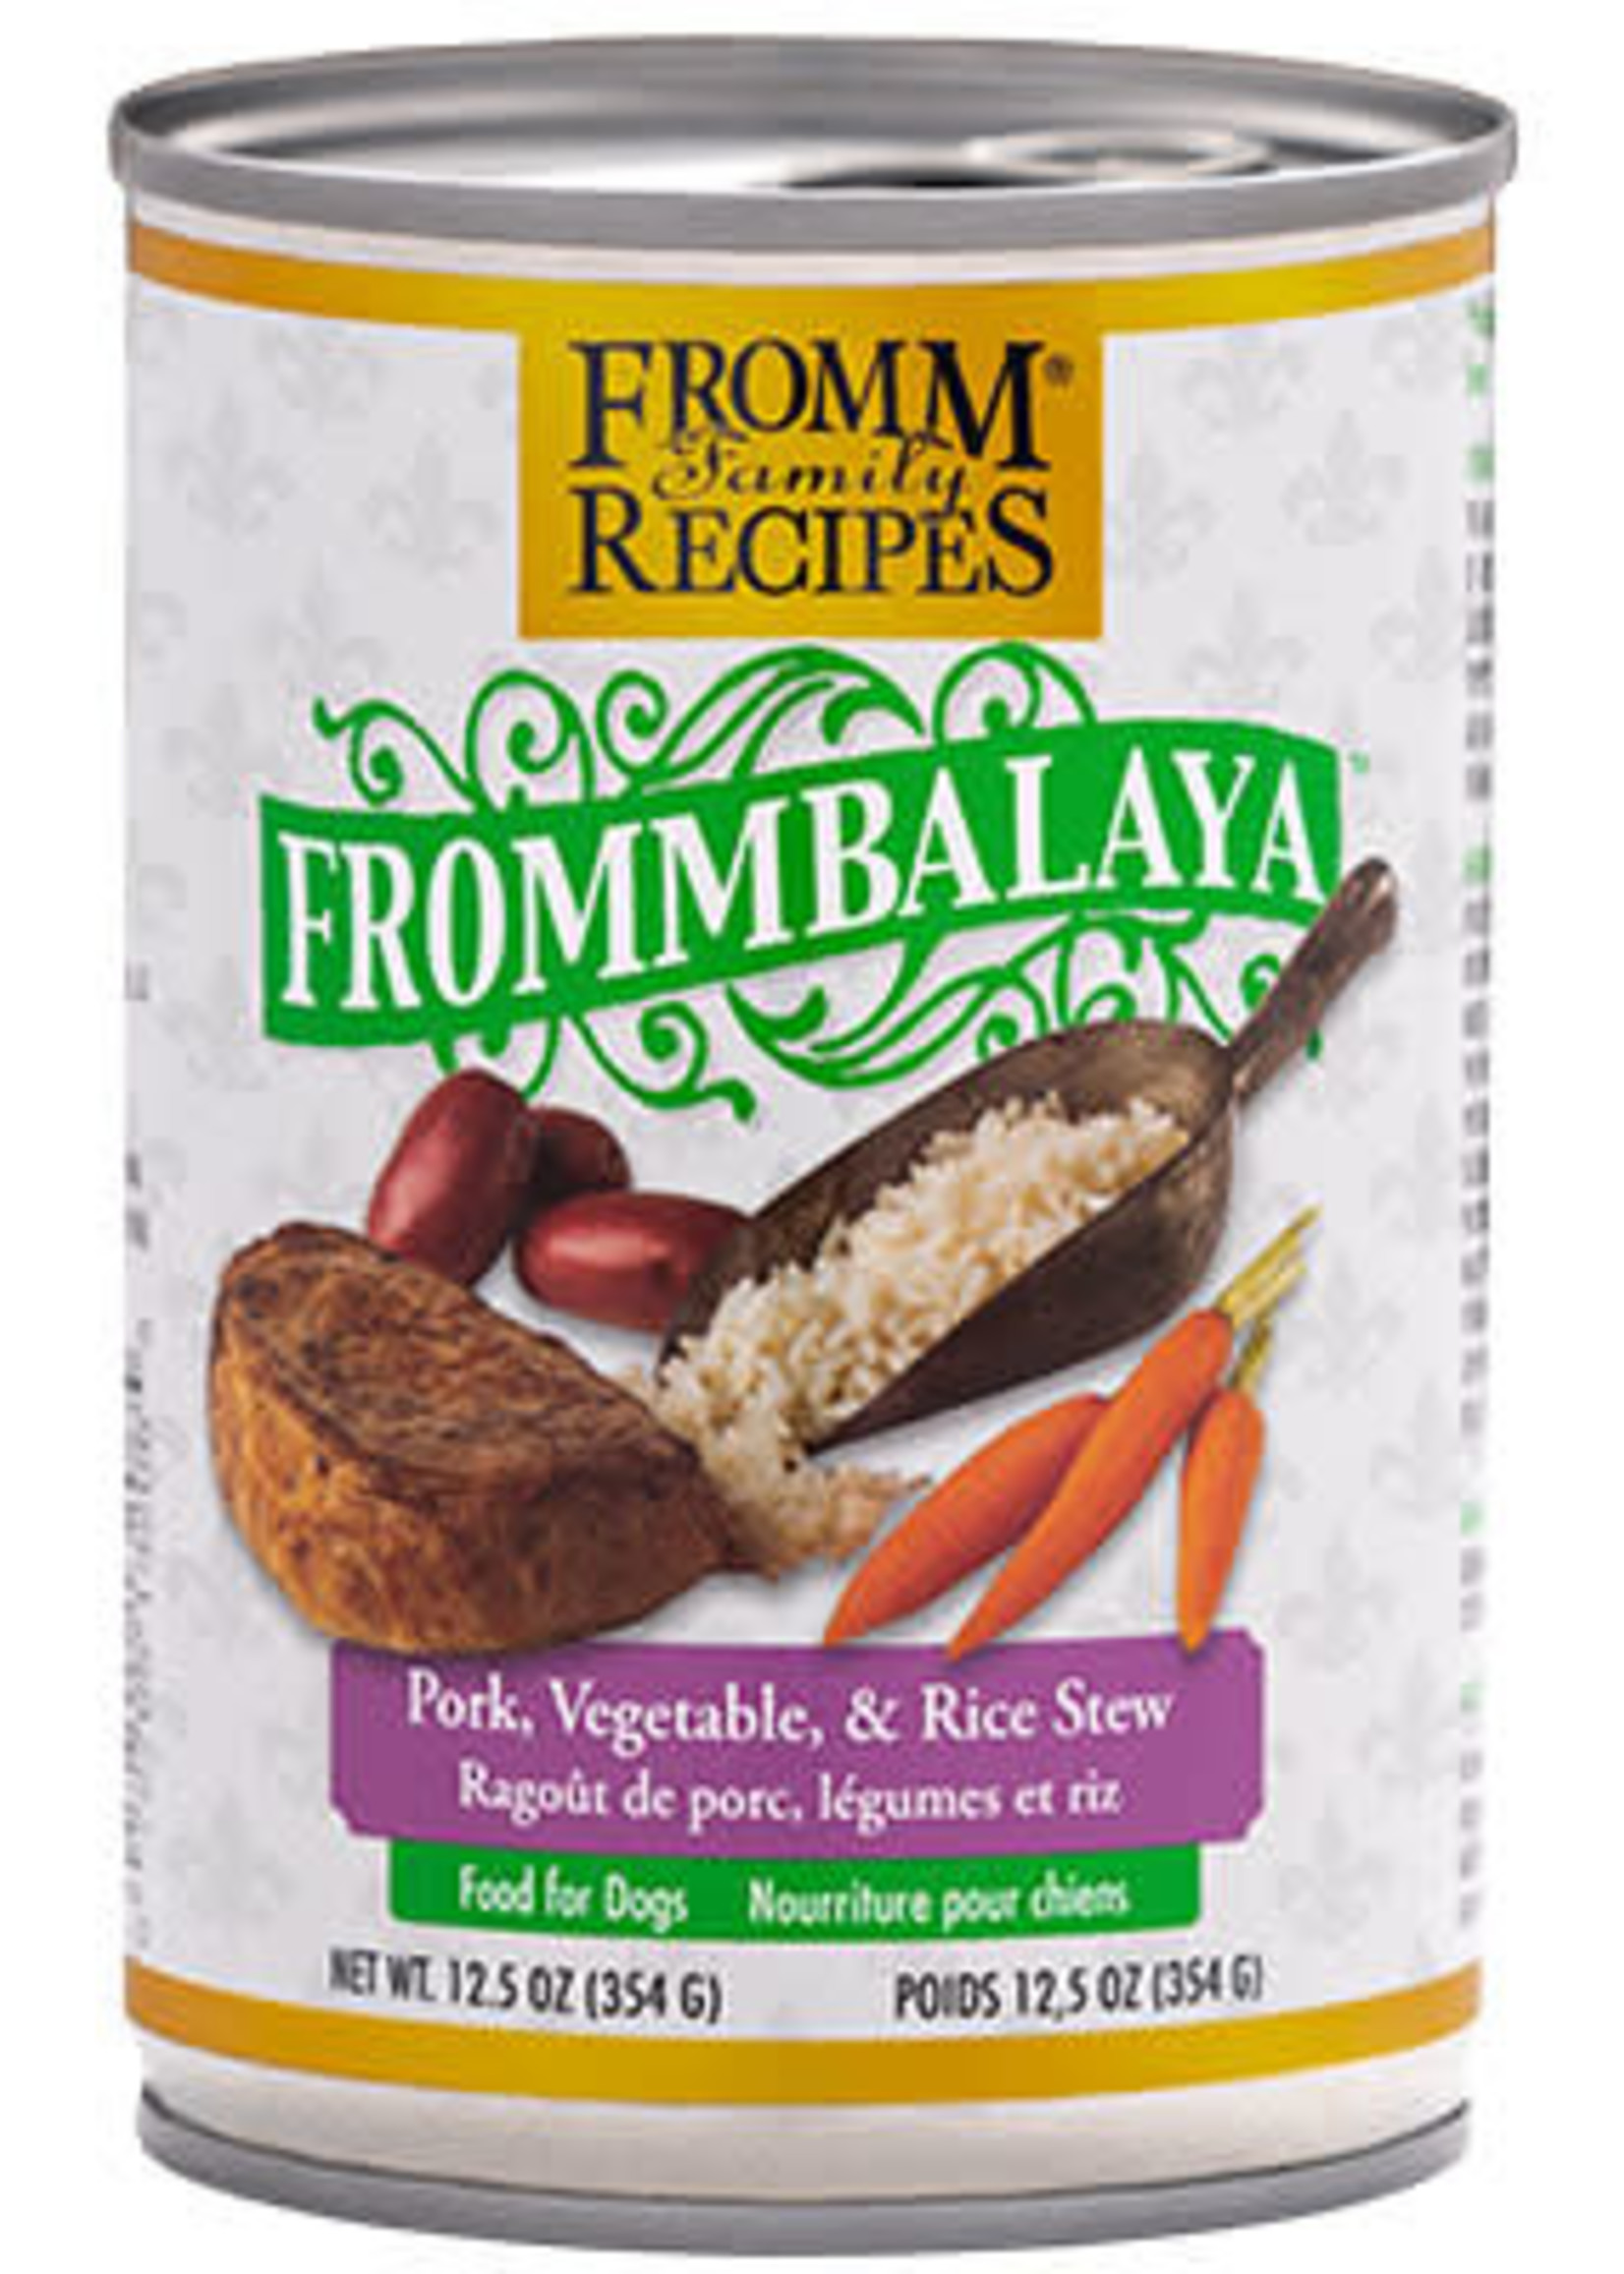 Fromm® FrommBALAYA Pork, Vegetable, & Rice Stew 12.5oz